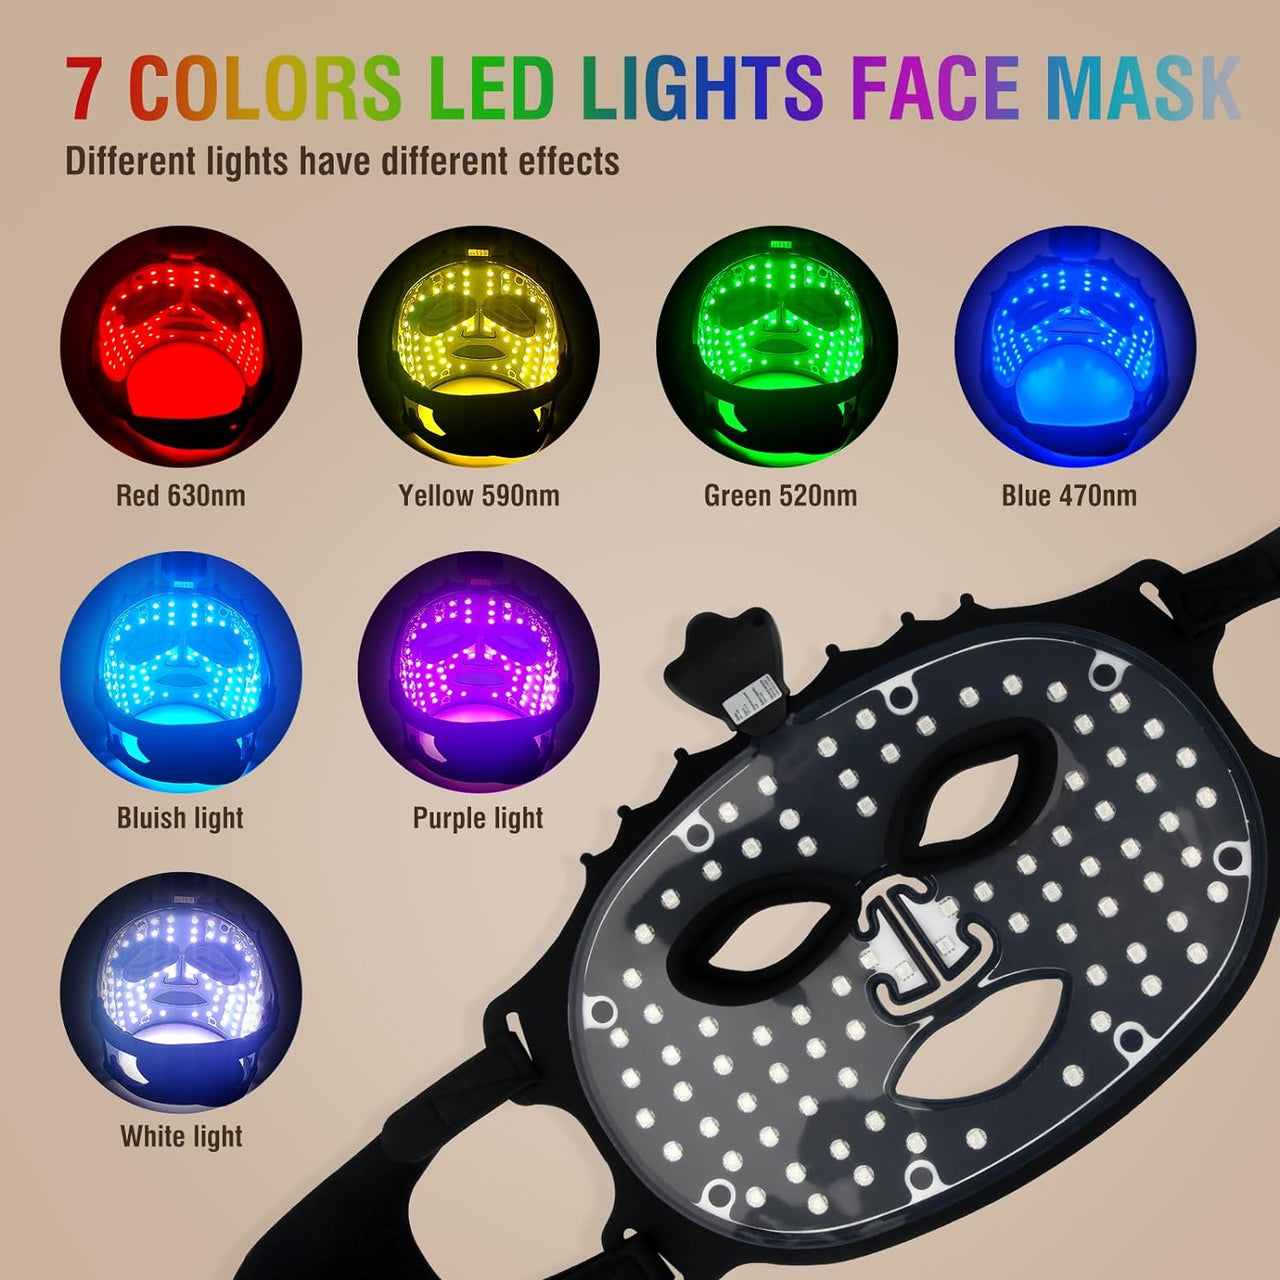 7 Color Red Light Therapy Mask, Wireless LED Face Mask